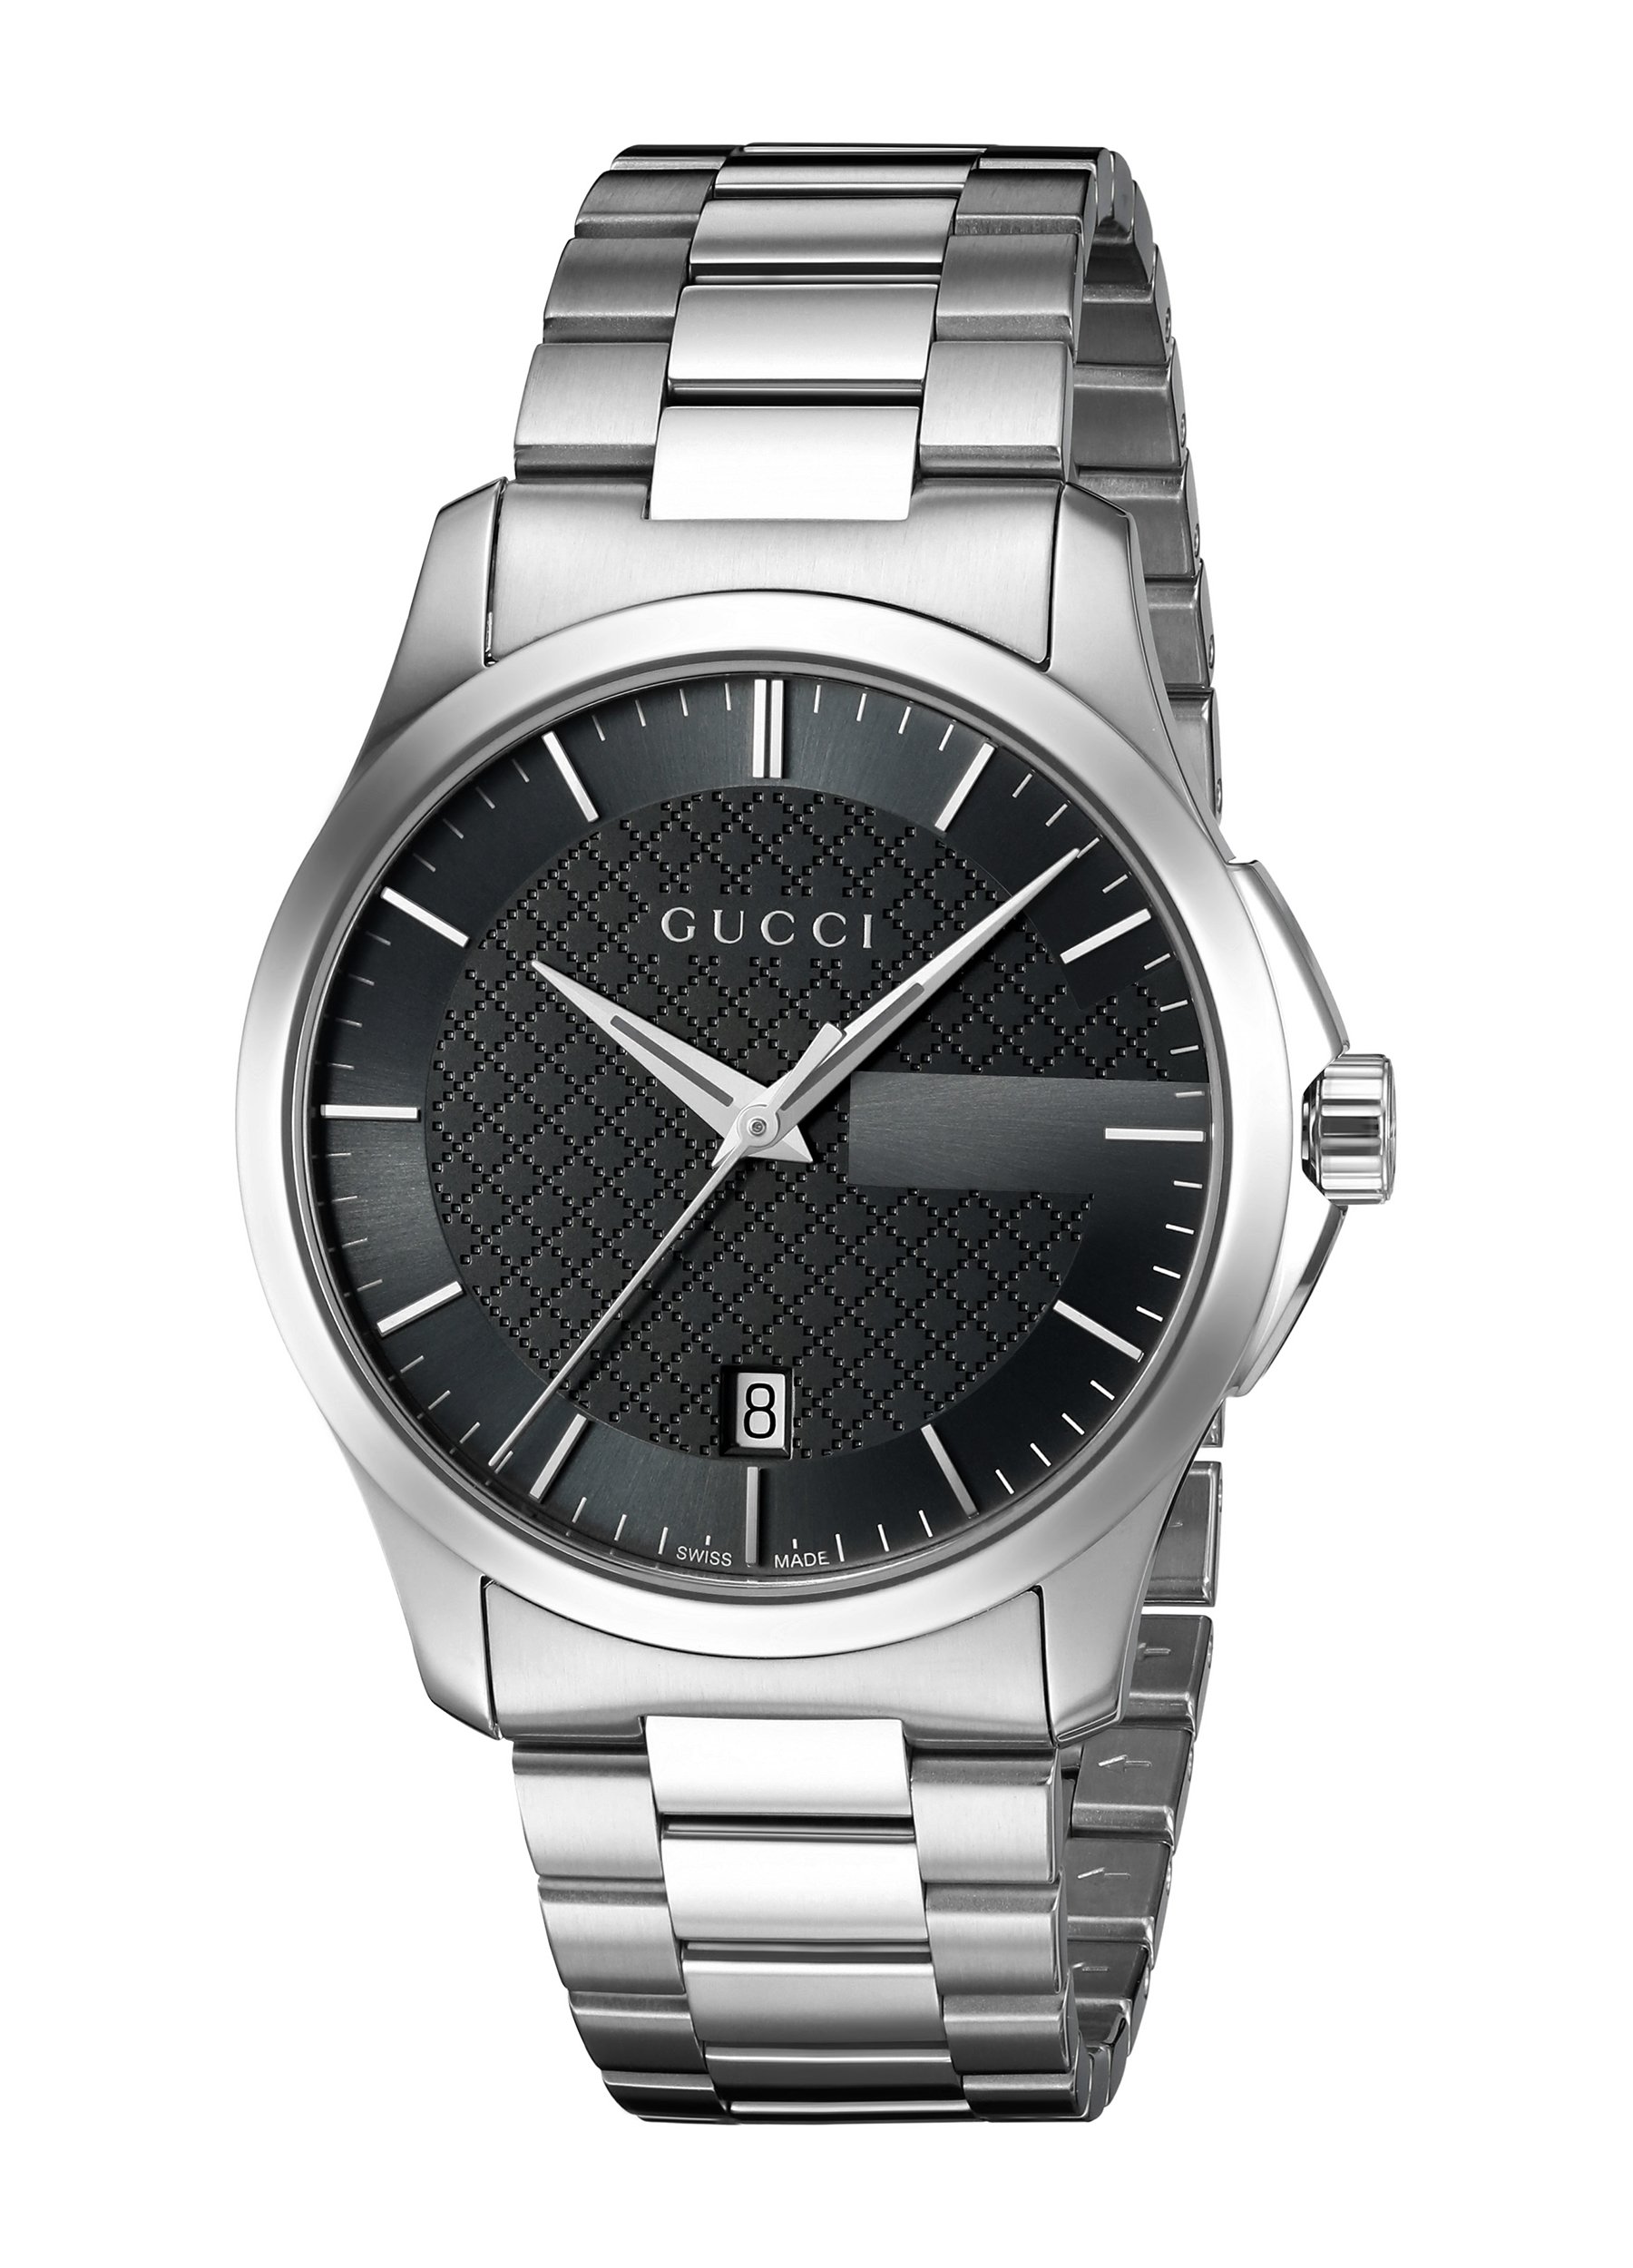 Gucci 'G-Timelss' Quartz Stainless Steel unisex adultWatch, Color:Silver-Toned (Model: YA126457)